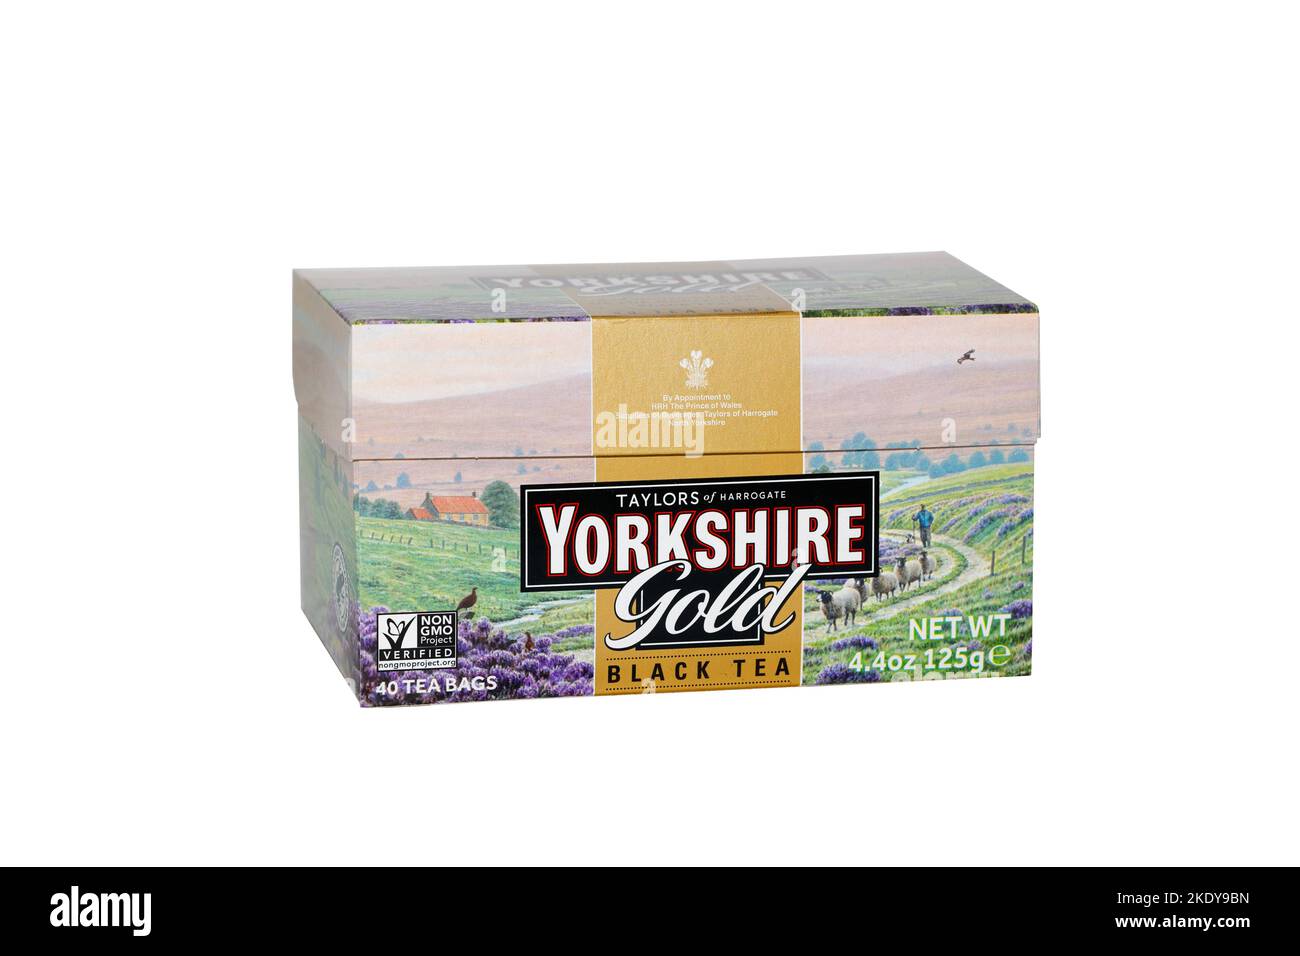 A box of Taylors of Harrogate Yorkshire Gold Black Tea bags isolated on a white background. cutout image for illustration and editorial use. Stock Photo